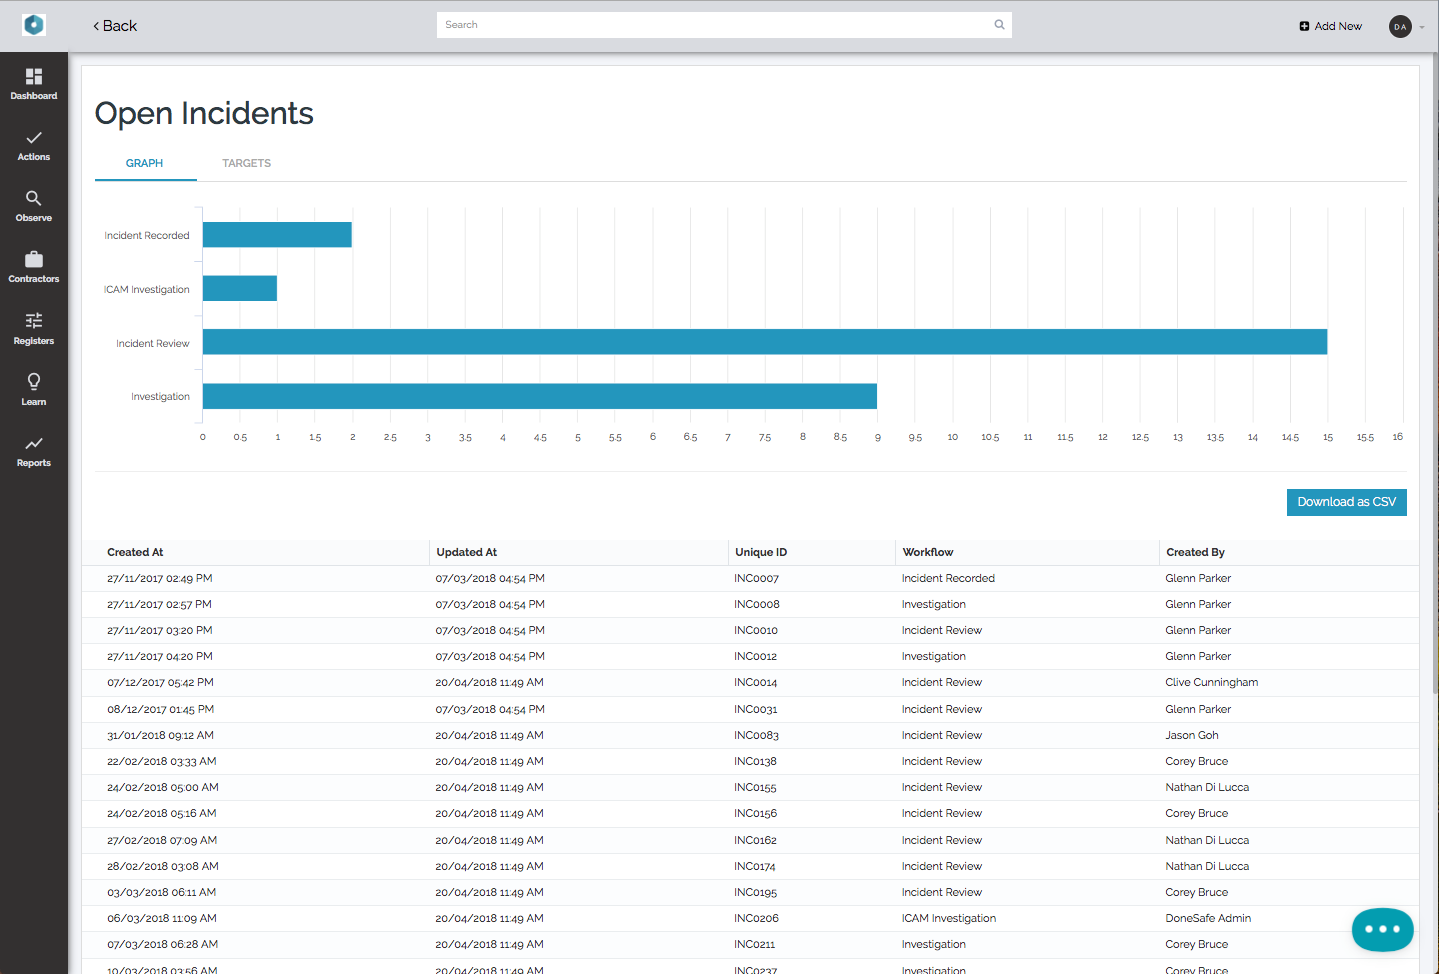 Donesafe Software - Generate reports to gain insight into open incidents